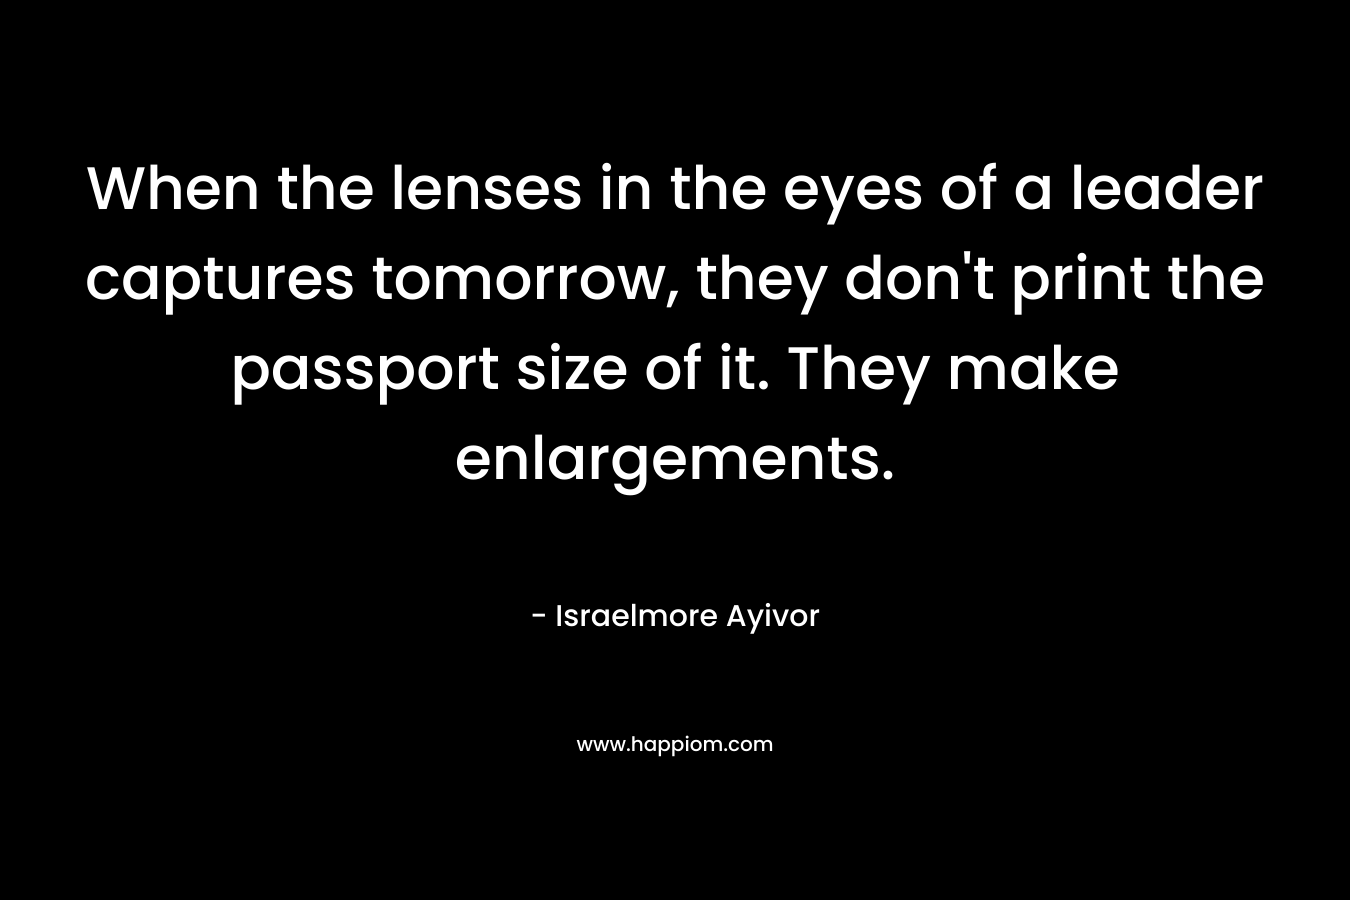 When the lenses in the eyes of a leader captures tomorrow, they don't print the passport size of it. They make enlargements.